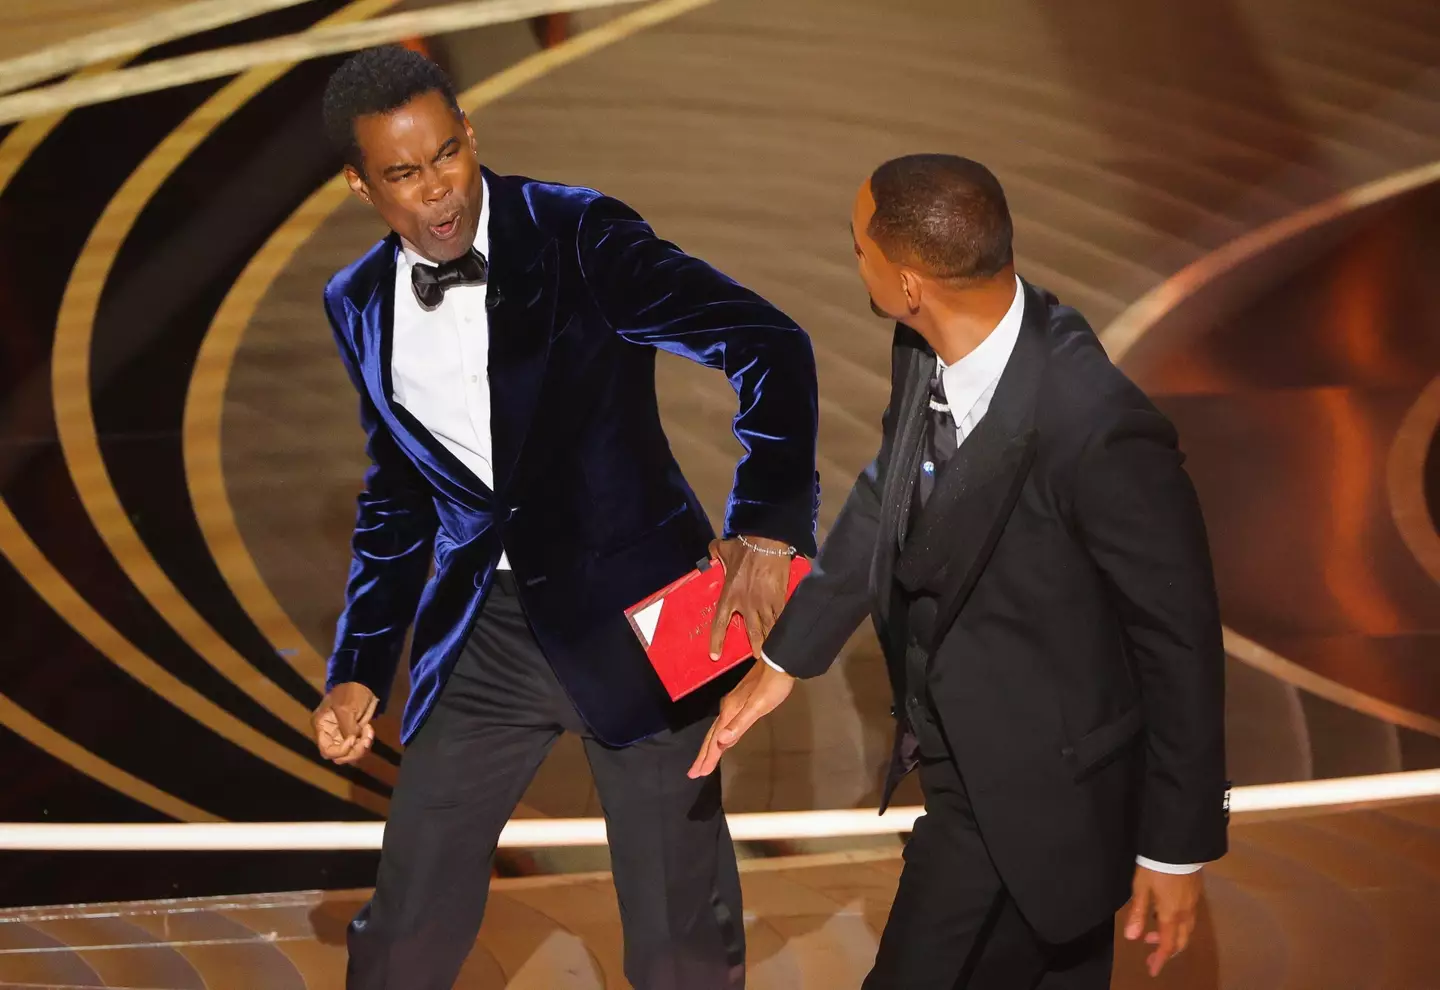 Chris Rock reacts to Will Smith's slap.